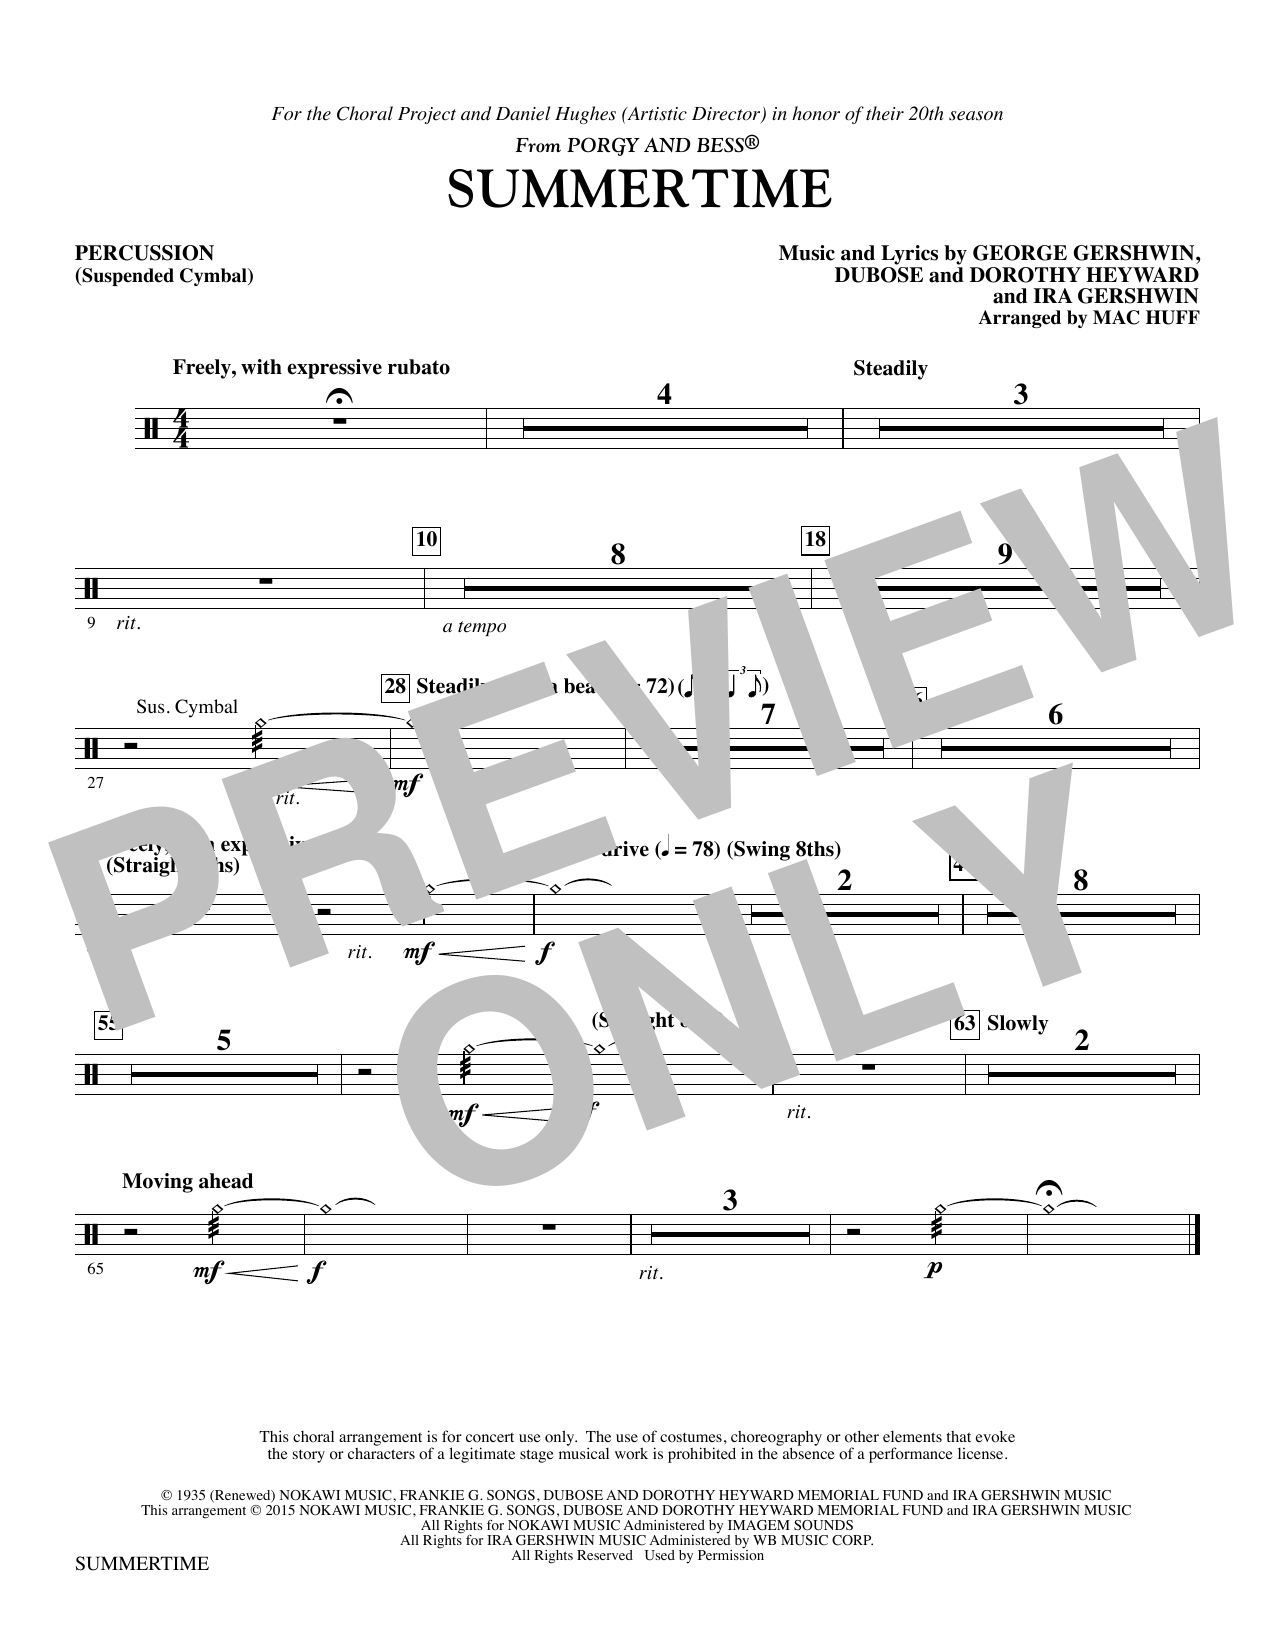 Summertime - Suspended Cymbal sheet music